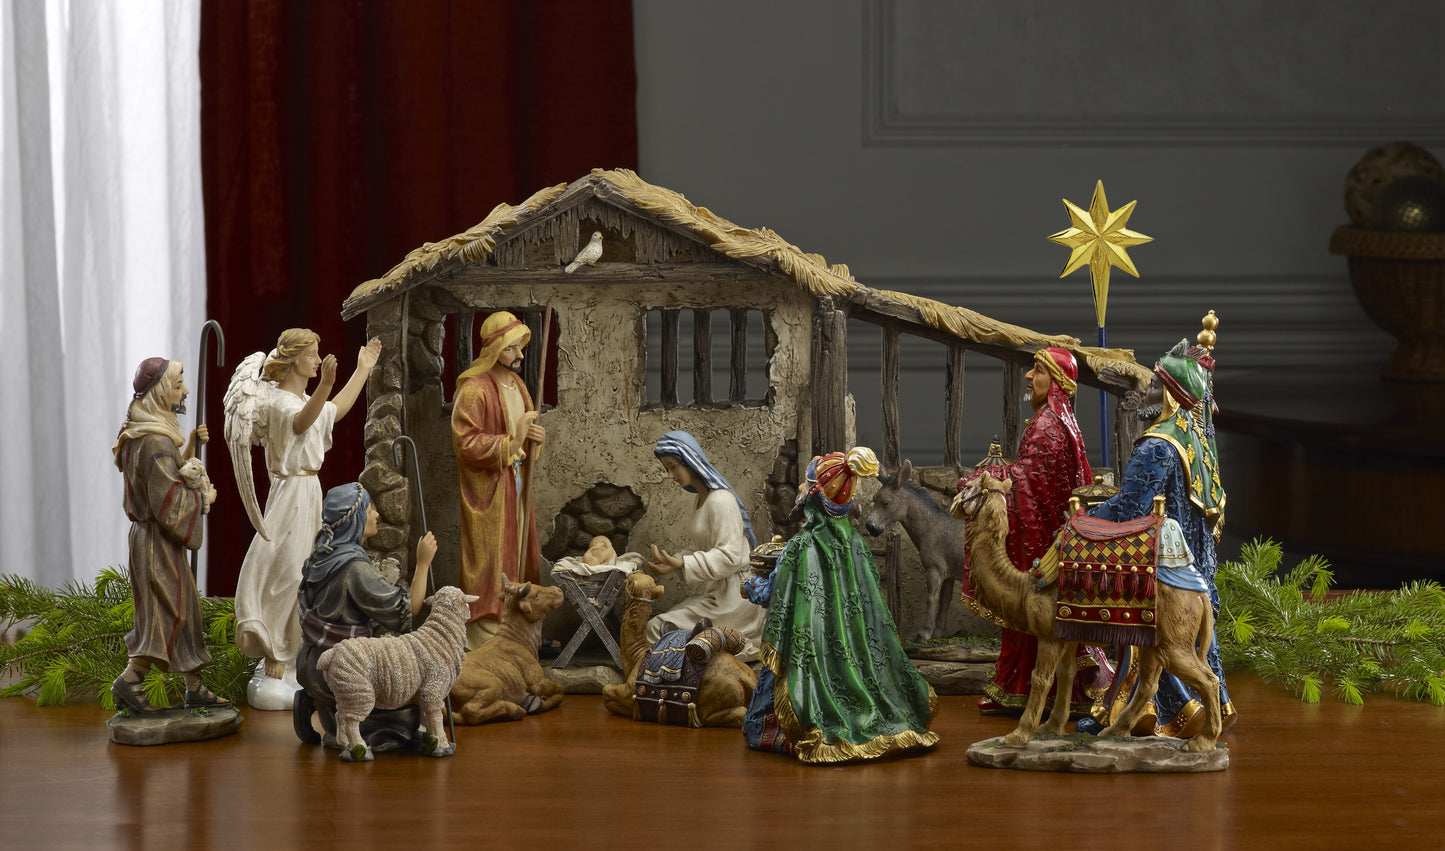 Full Nativity Set, 19 Pieces total Including All Nativity Figures, Stable and Animals - 7 Inch tall